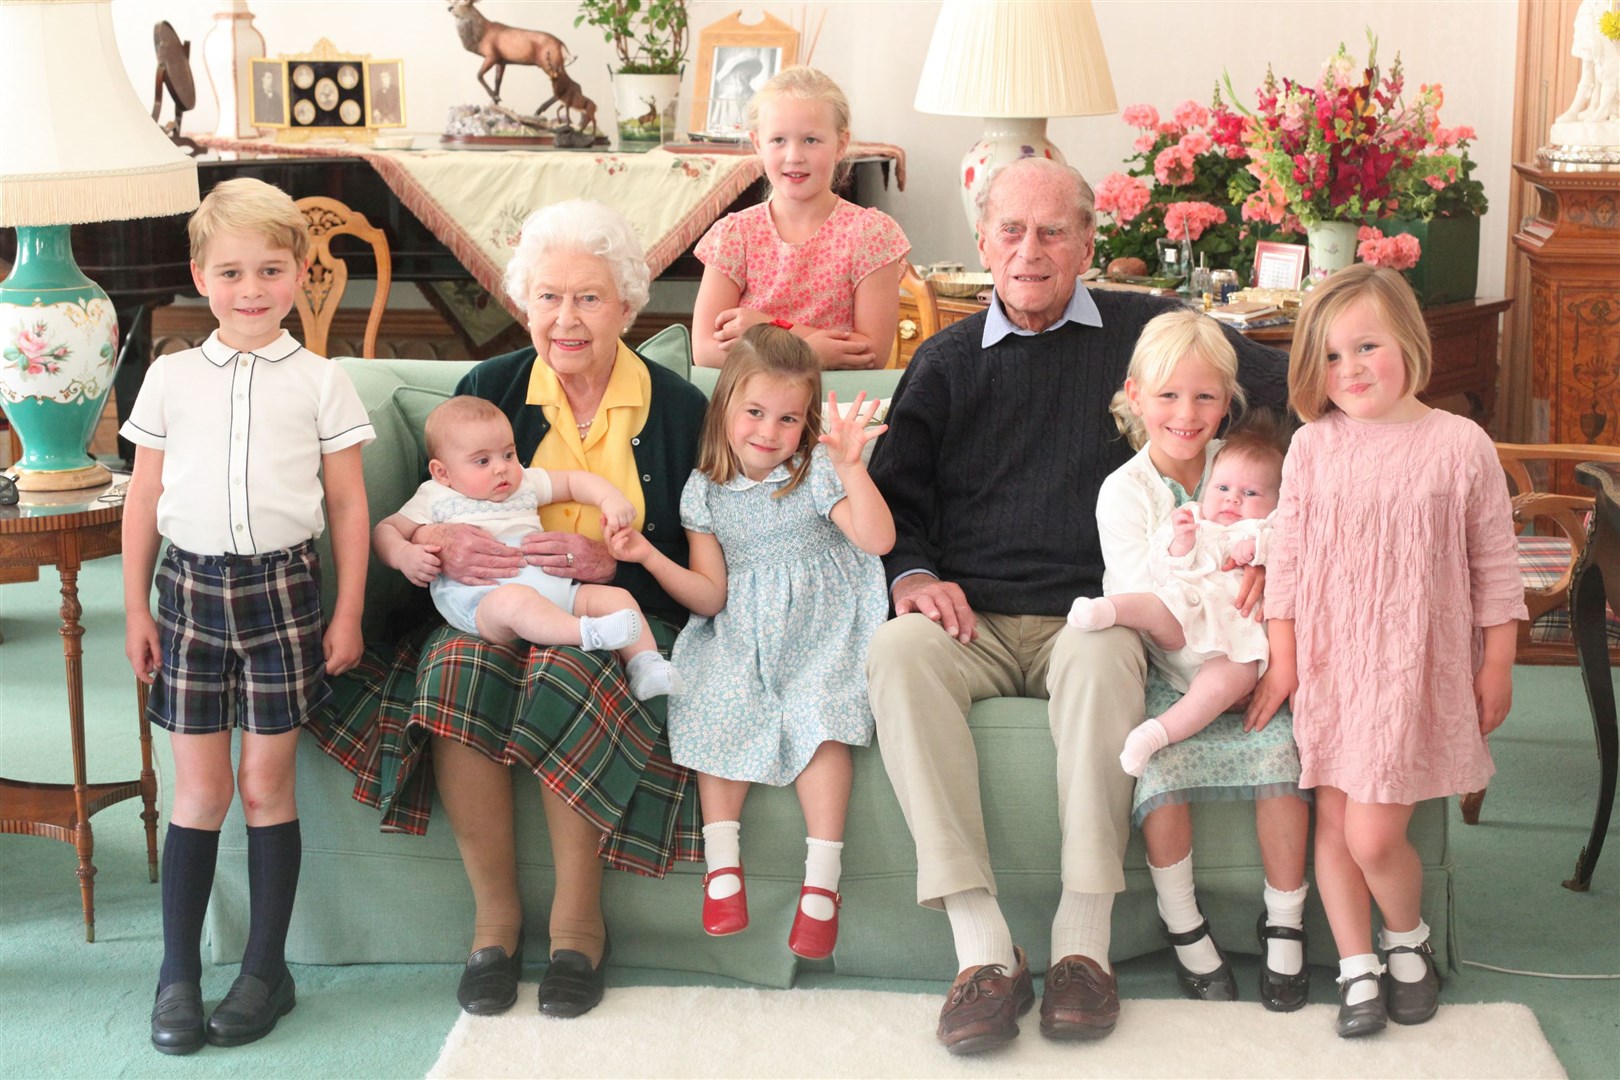 The Queen and Philip pictured with their great grandchildren at Balmoral in 2018 (Duchess of Cambridge/PA)